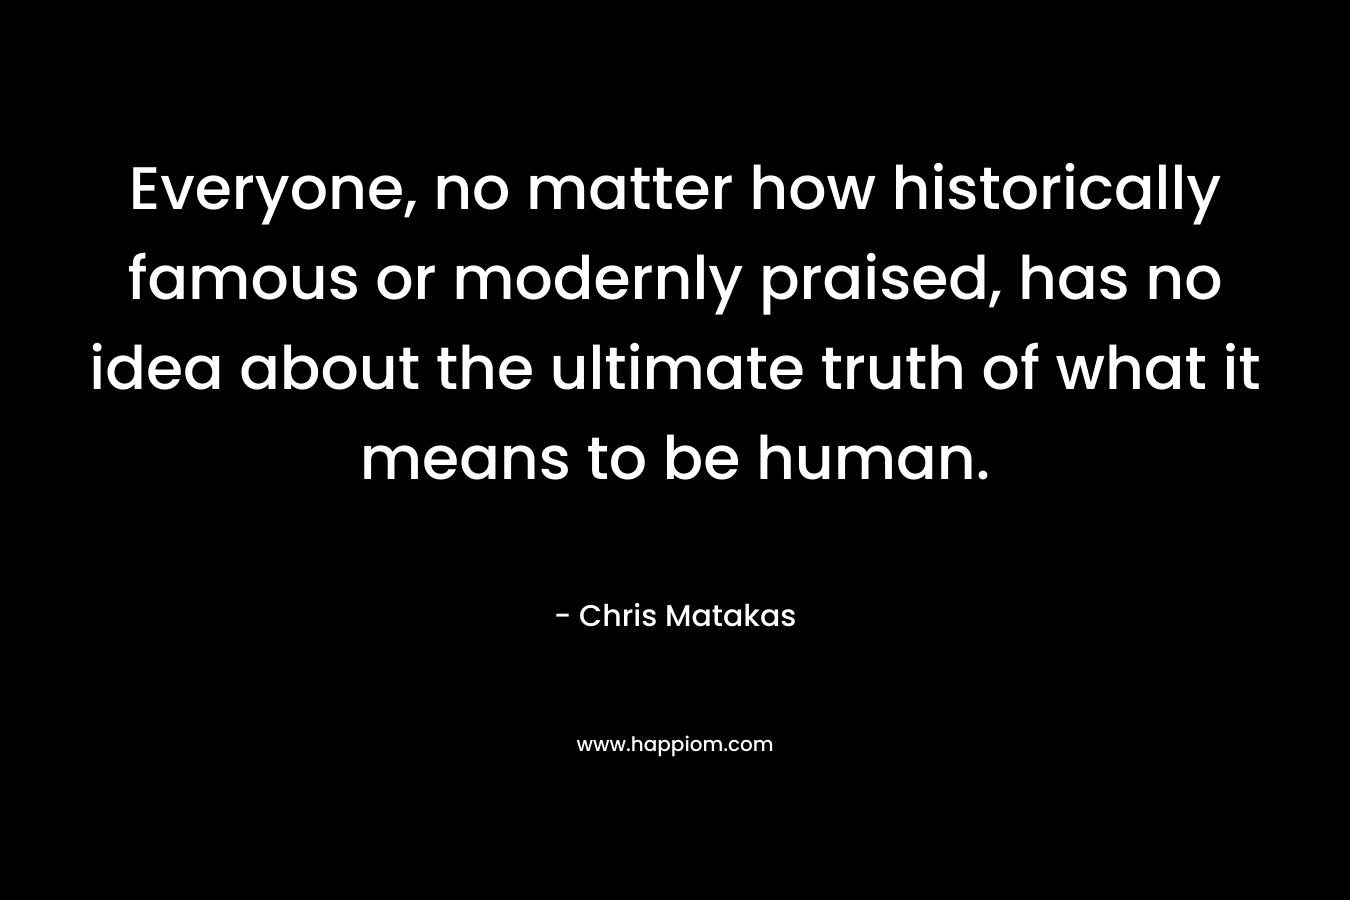 Everyone, no matter how historically famous or modernly praised, has no idea about the ultimate truth of what it means to be human. – Chris Matakas